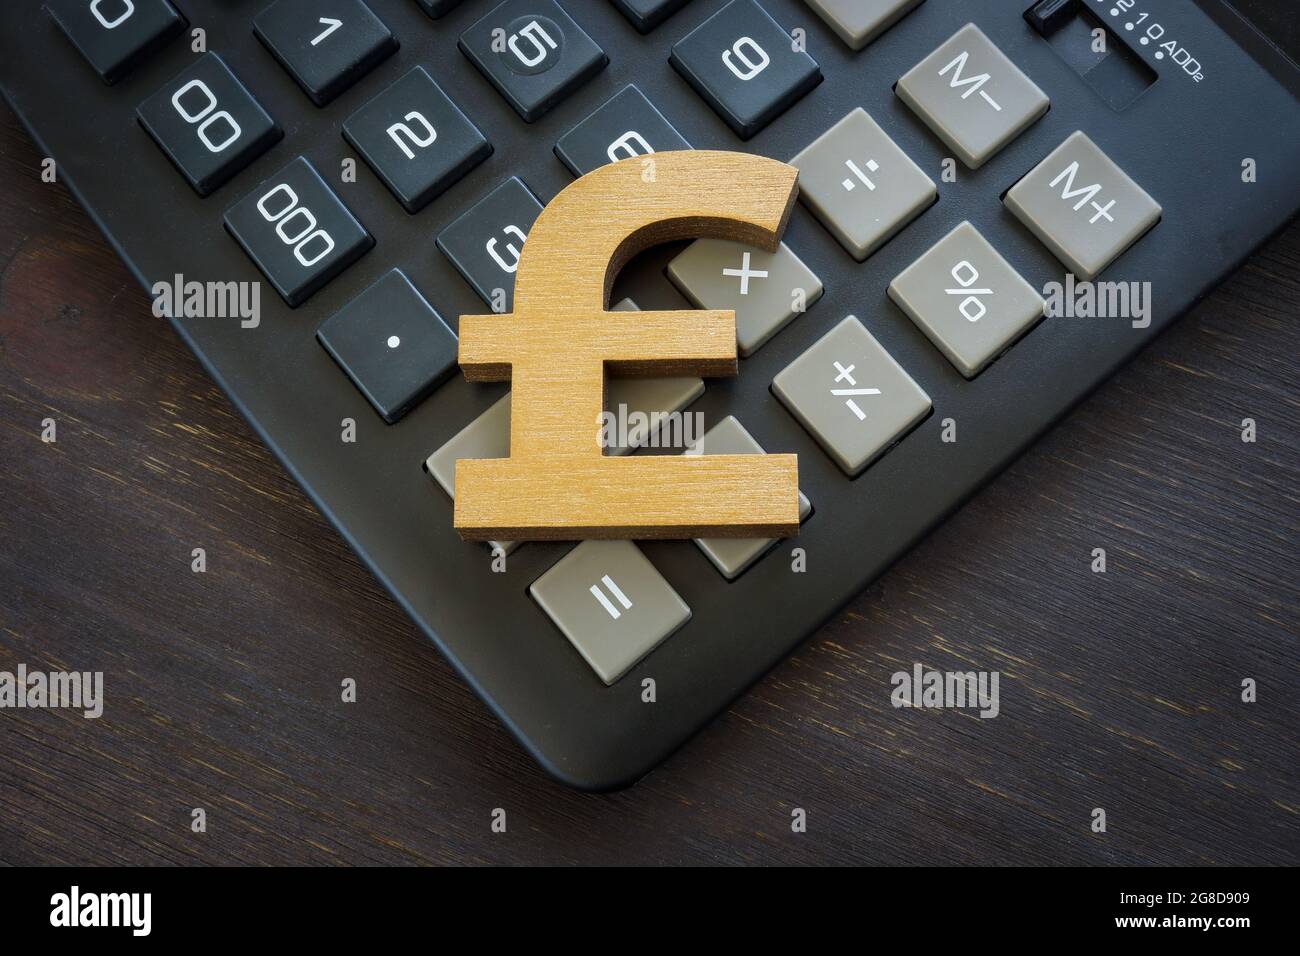 Pound sterling sign on a calculator as a symbol of currency exchange and finance. Stock Photo